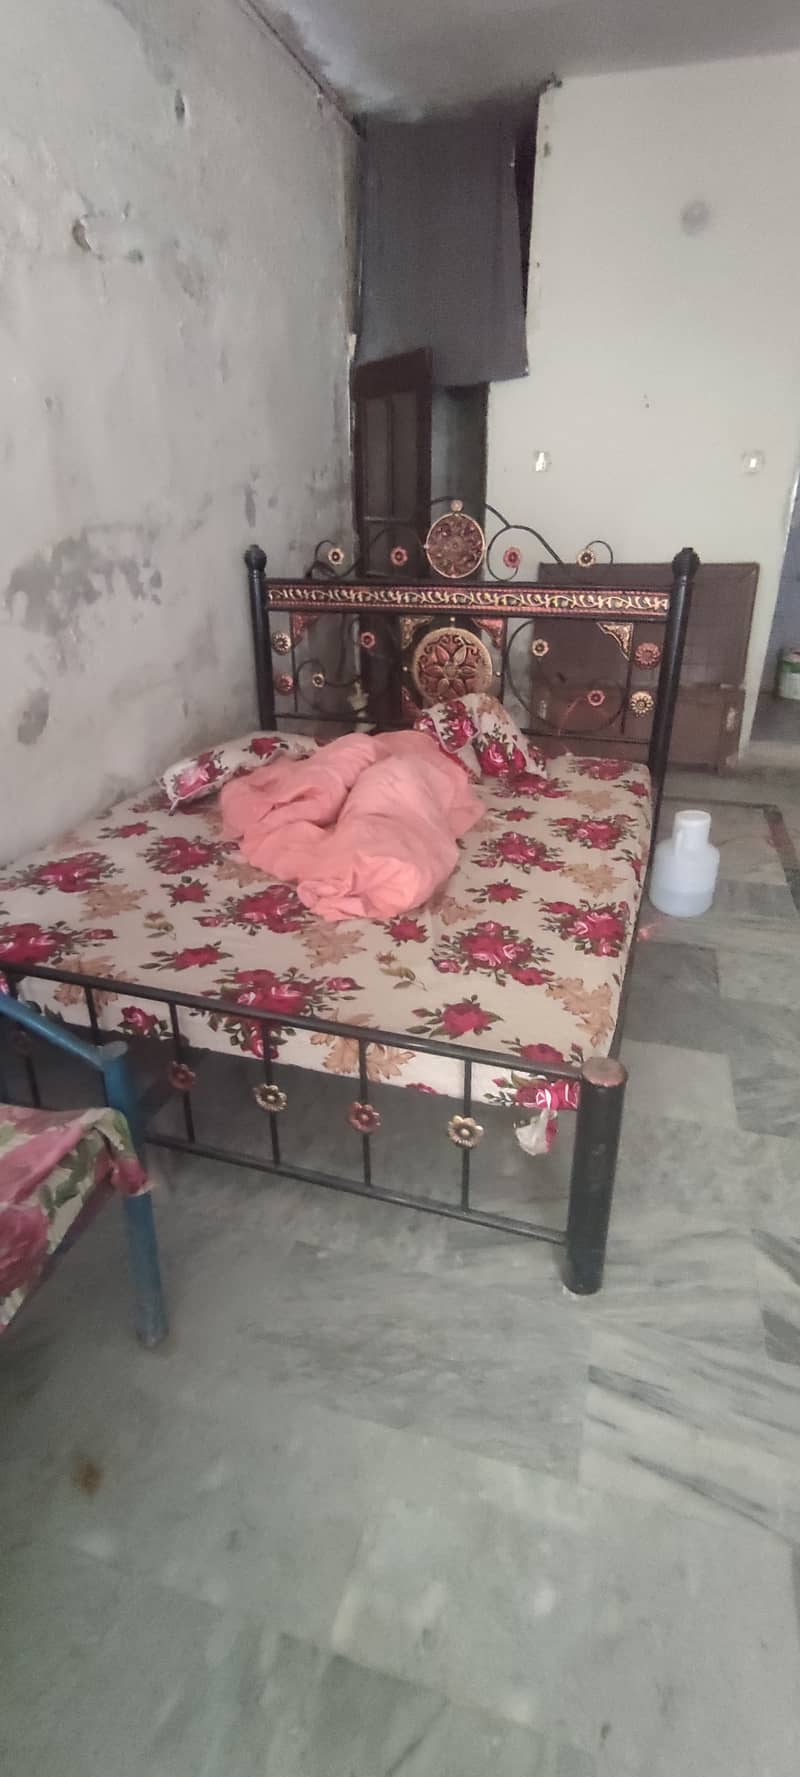 Iron bed with matress 10/10 2